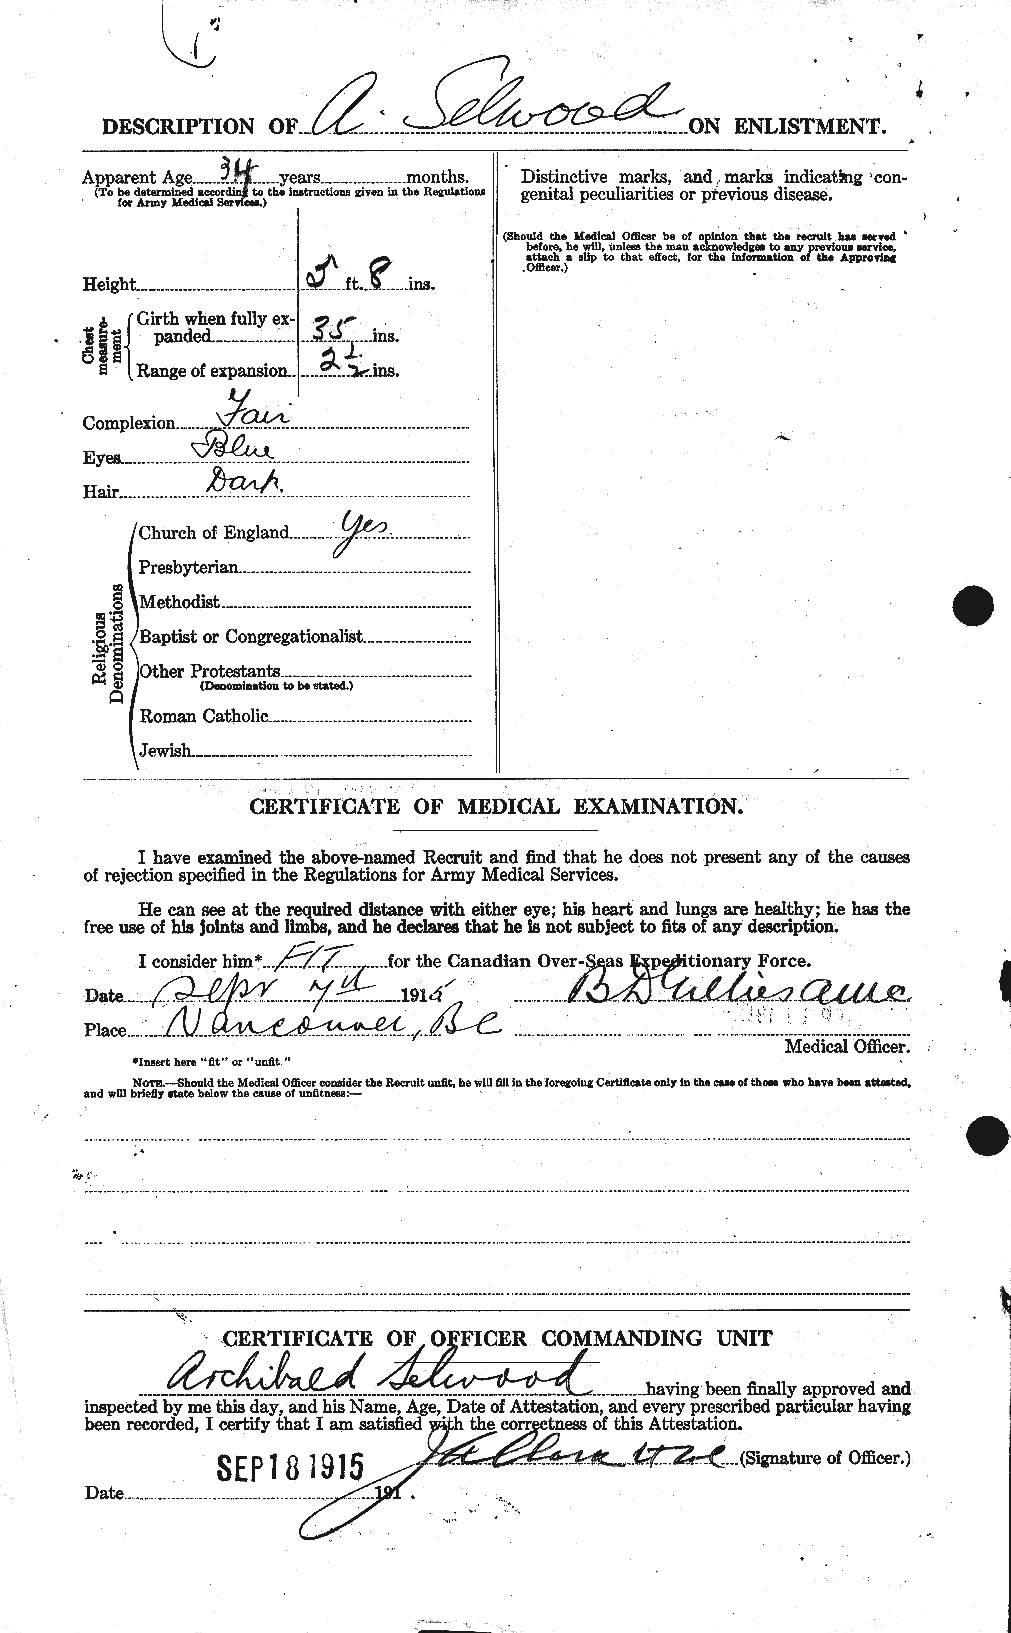 Personnel Records of the First World War - CEF 087117b